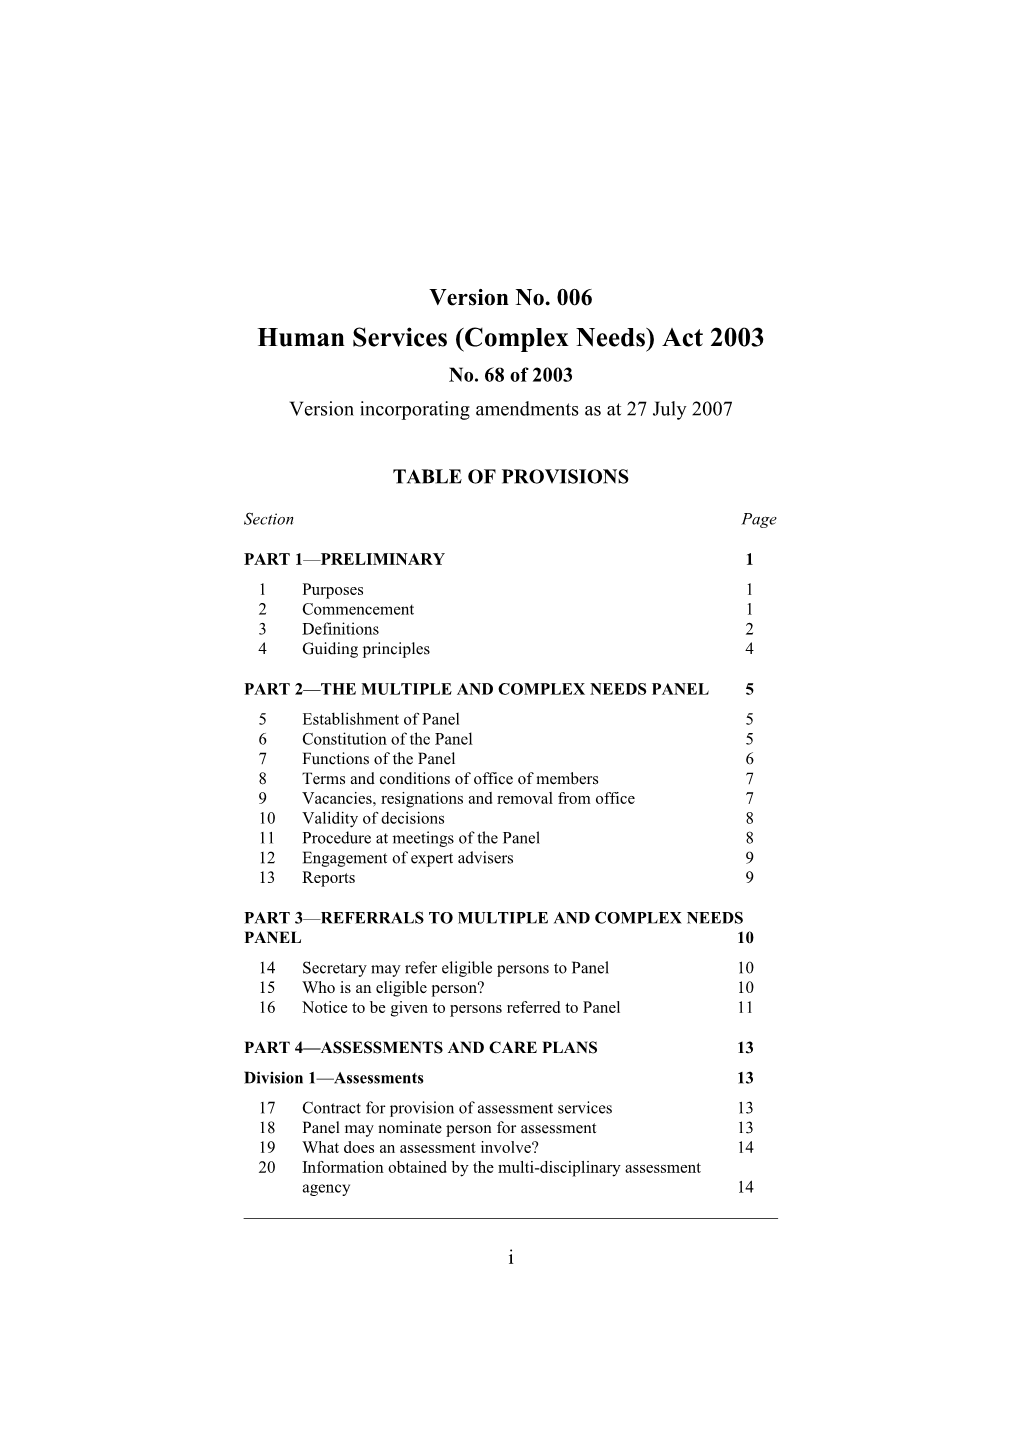 Human Services (Complex Needs) Act 2003